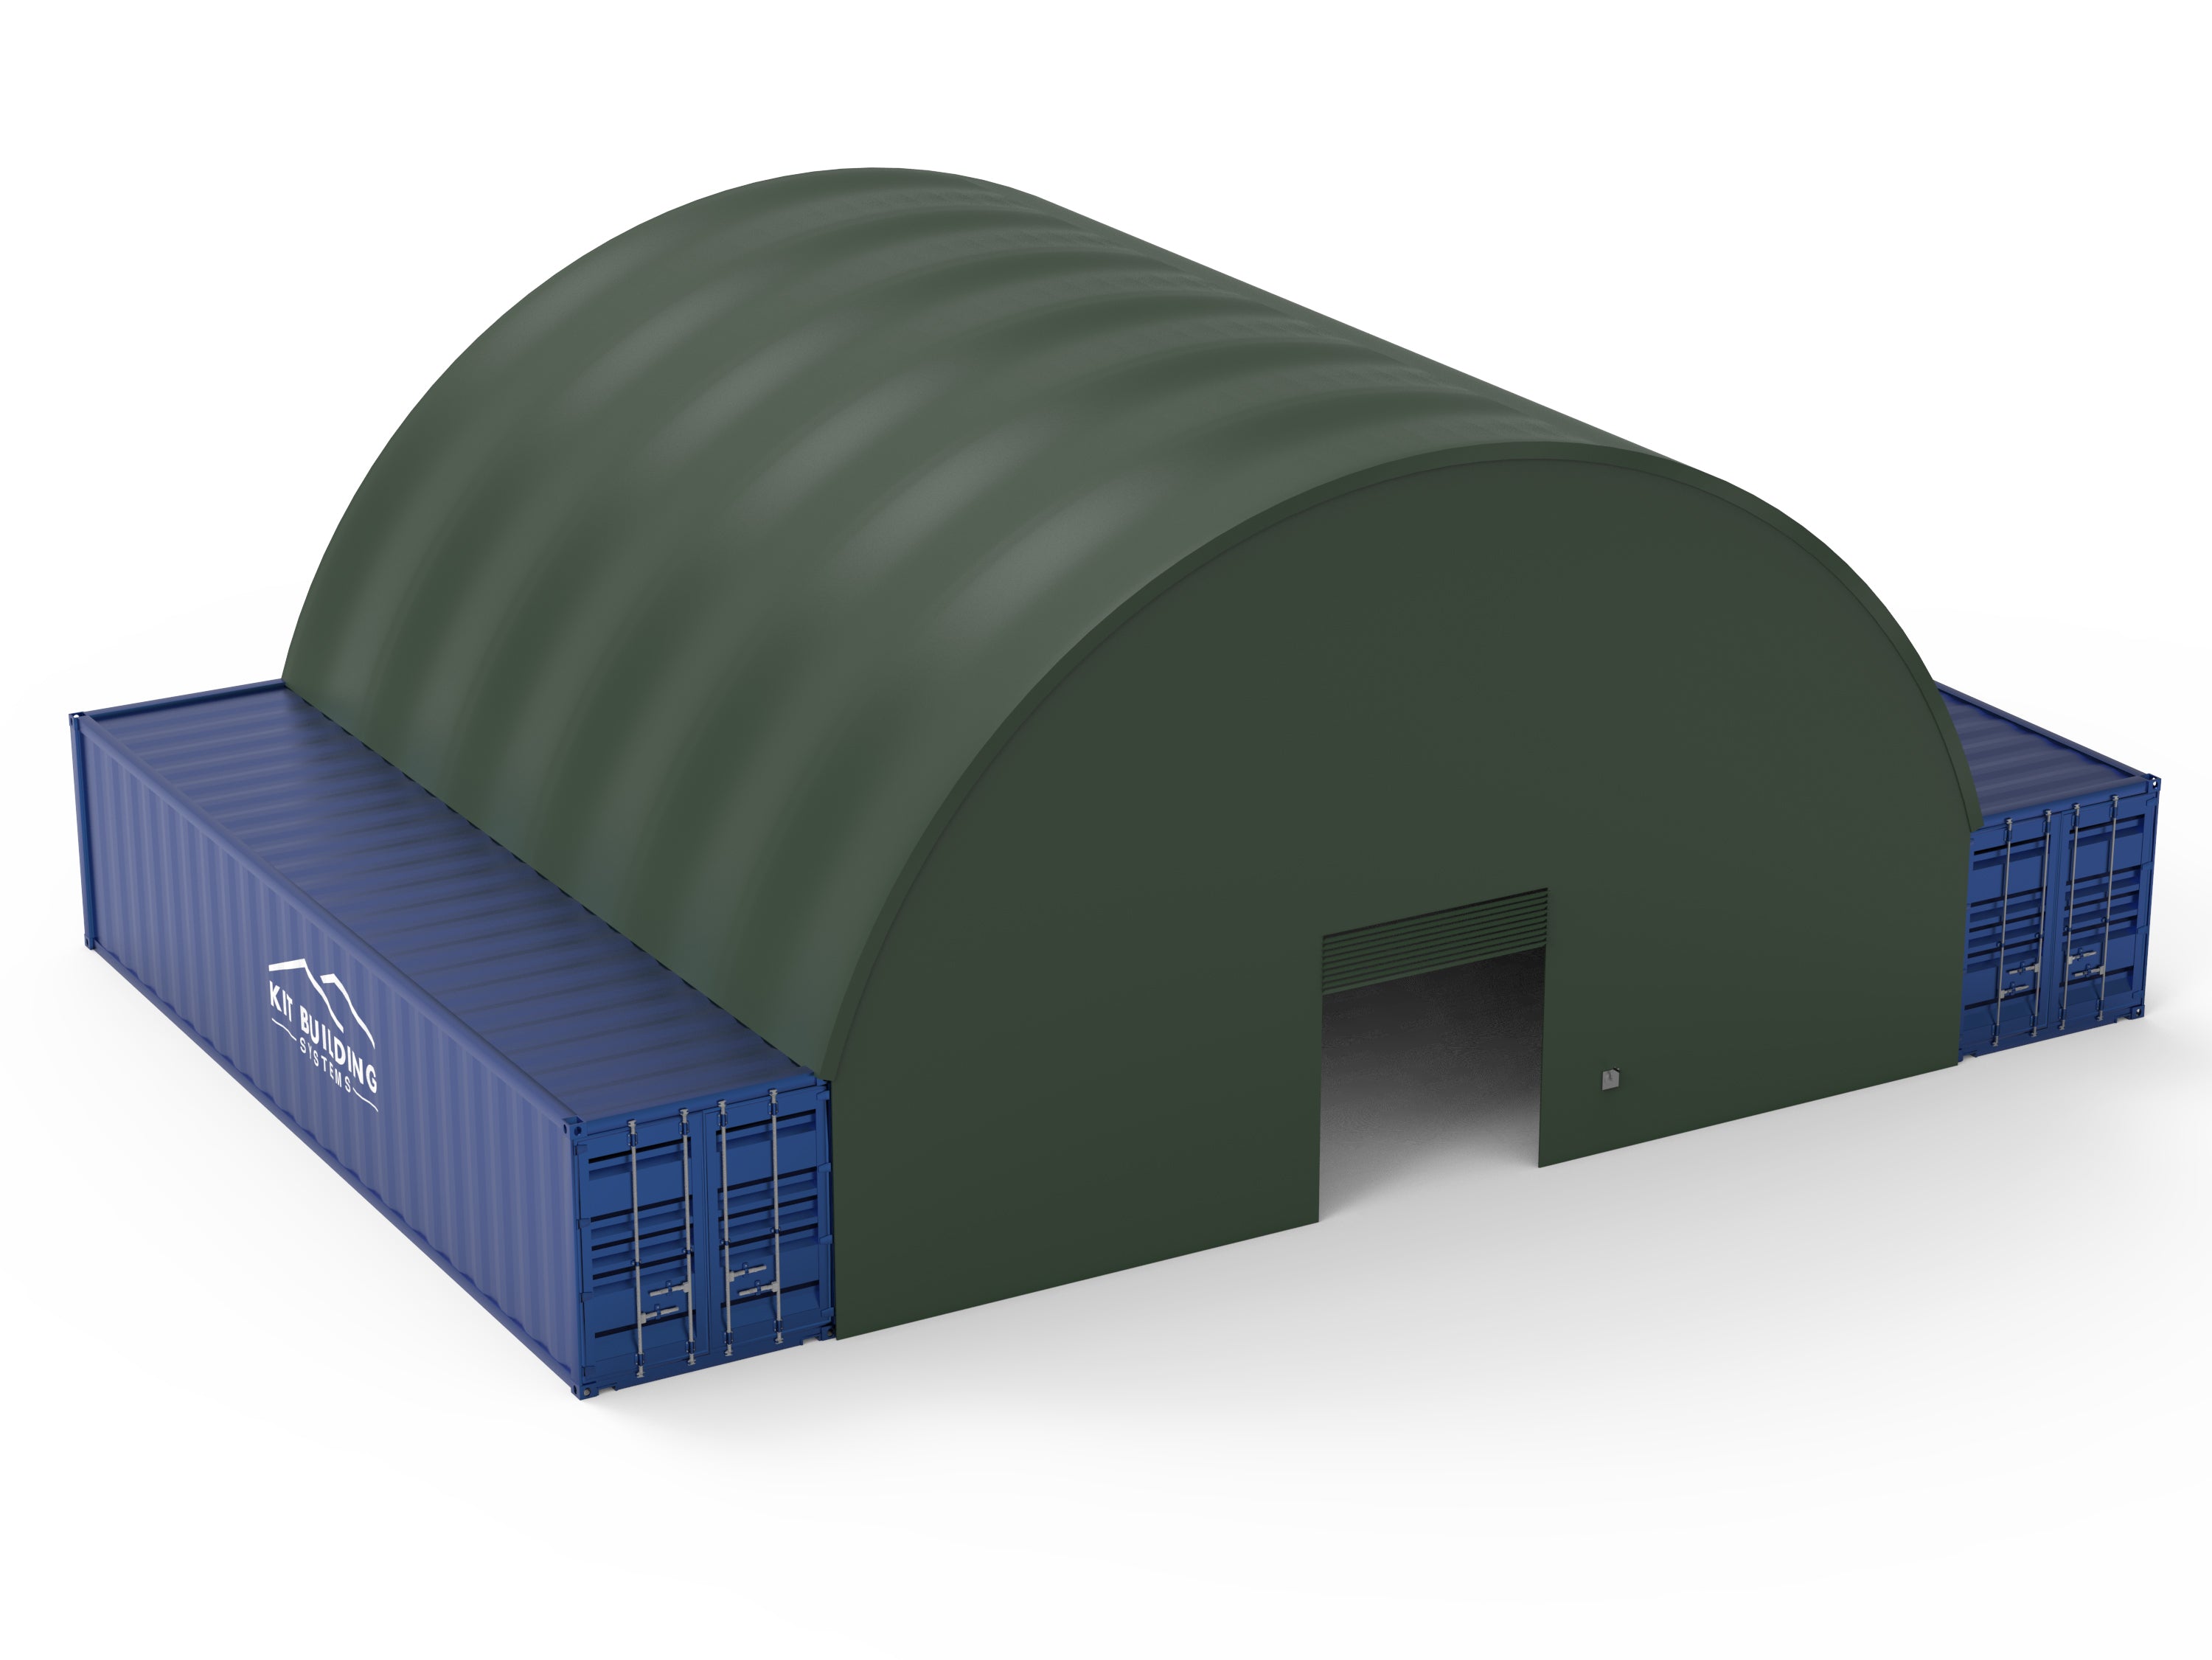 12m x 12m - Single Truss Container canopy - Closed back panel and front panel with winch door - Green